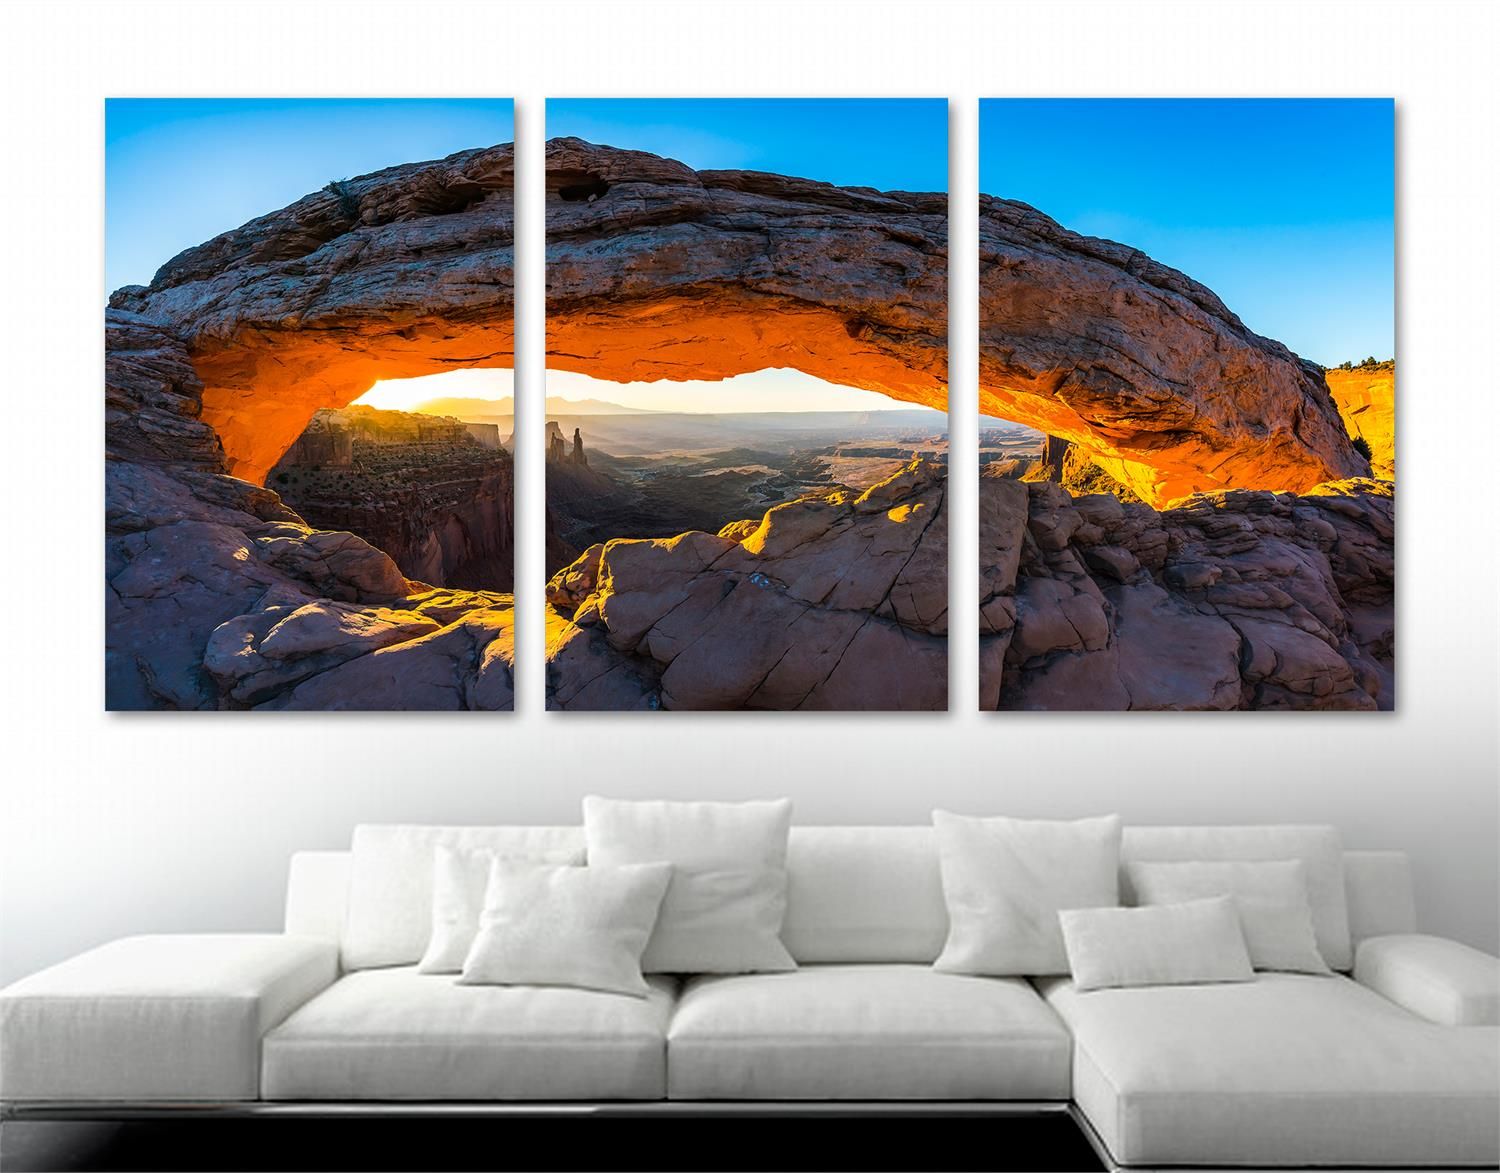 Mesa Arch At Sunrise Canvas Print Wall Art – 3 Panel Split, Triptych |  Canvas Quest With Regard To Best And Newest Sunrise Wall Art (View 19 of 20)